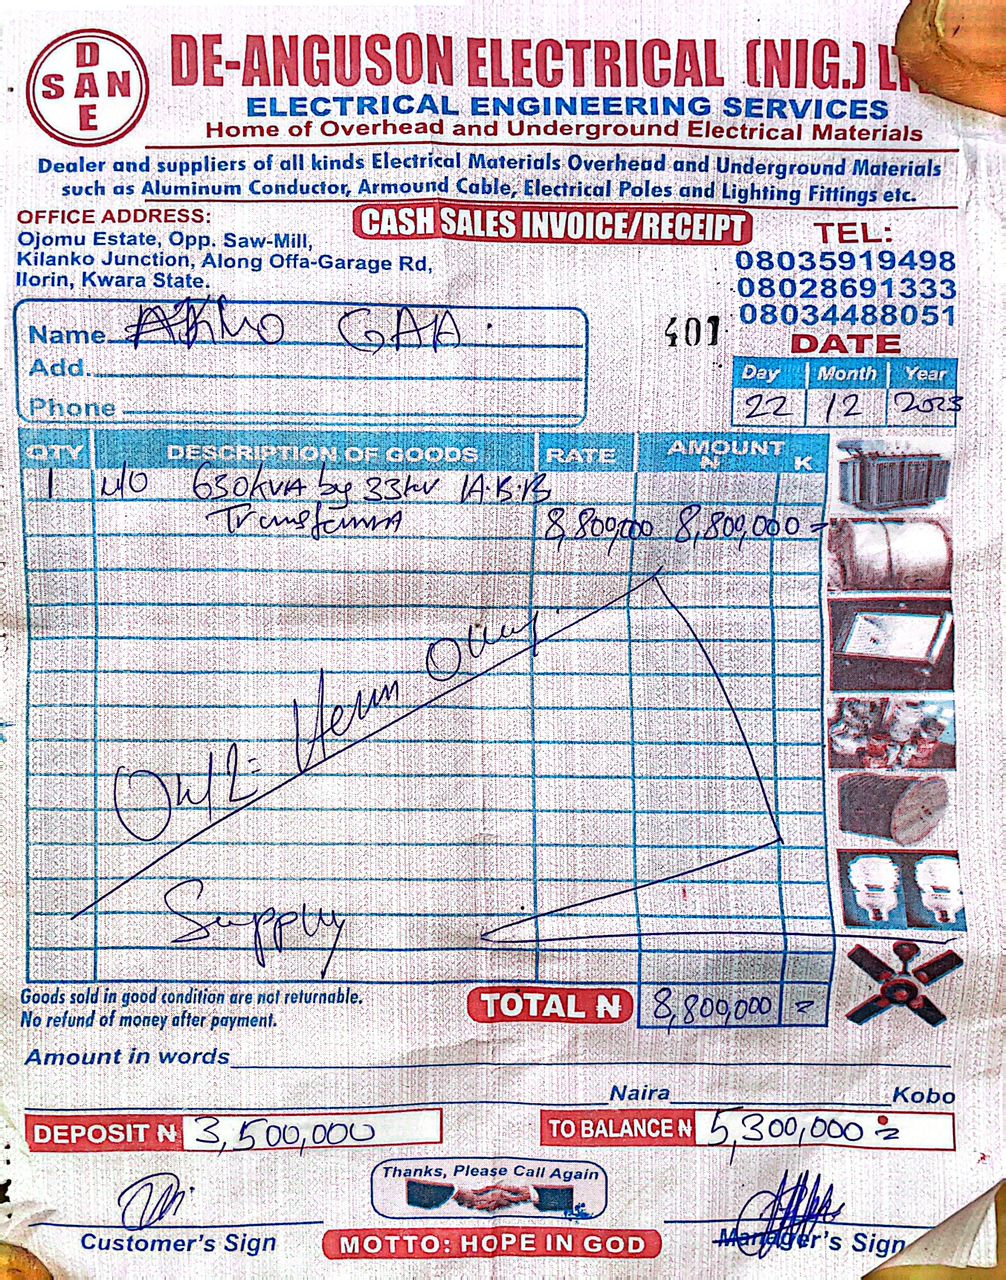 Receipt for the payment of transformer